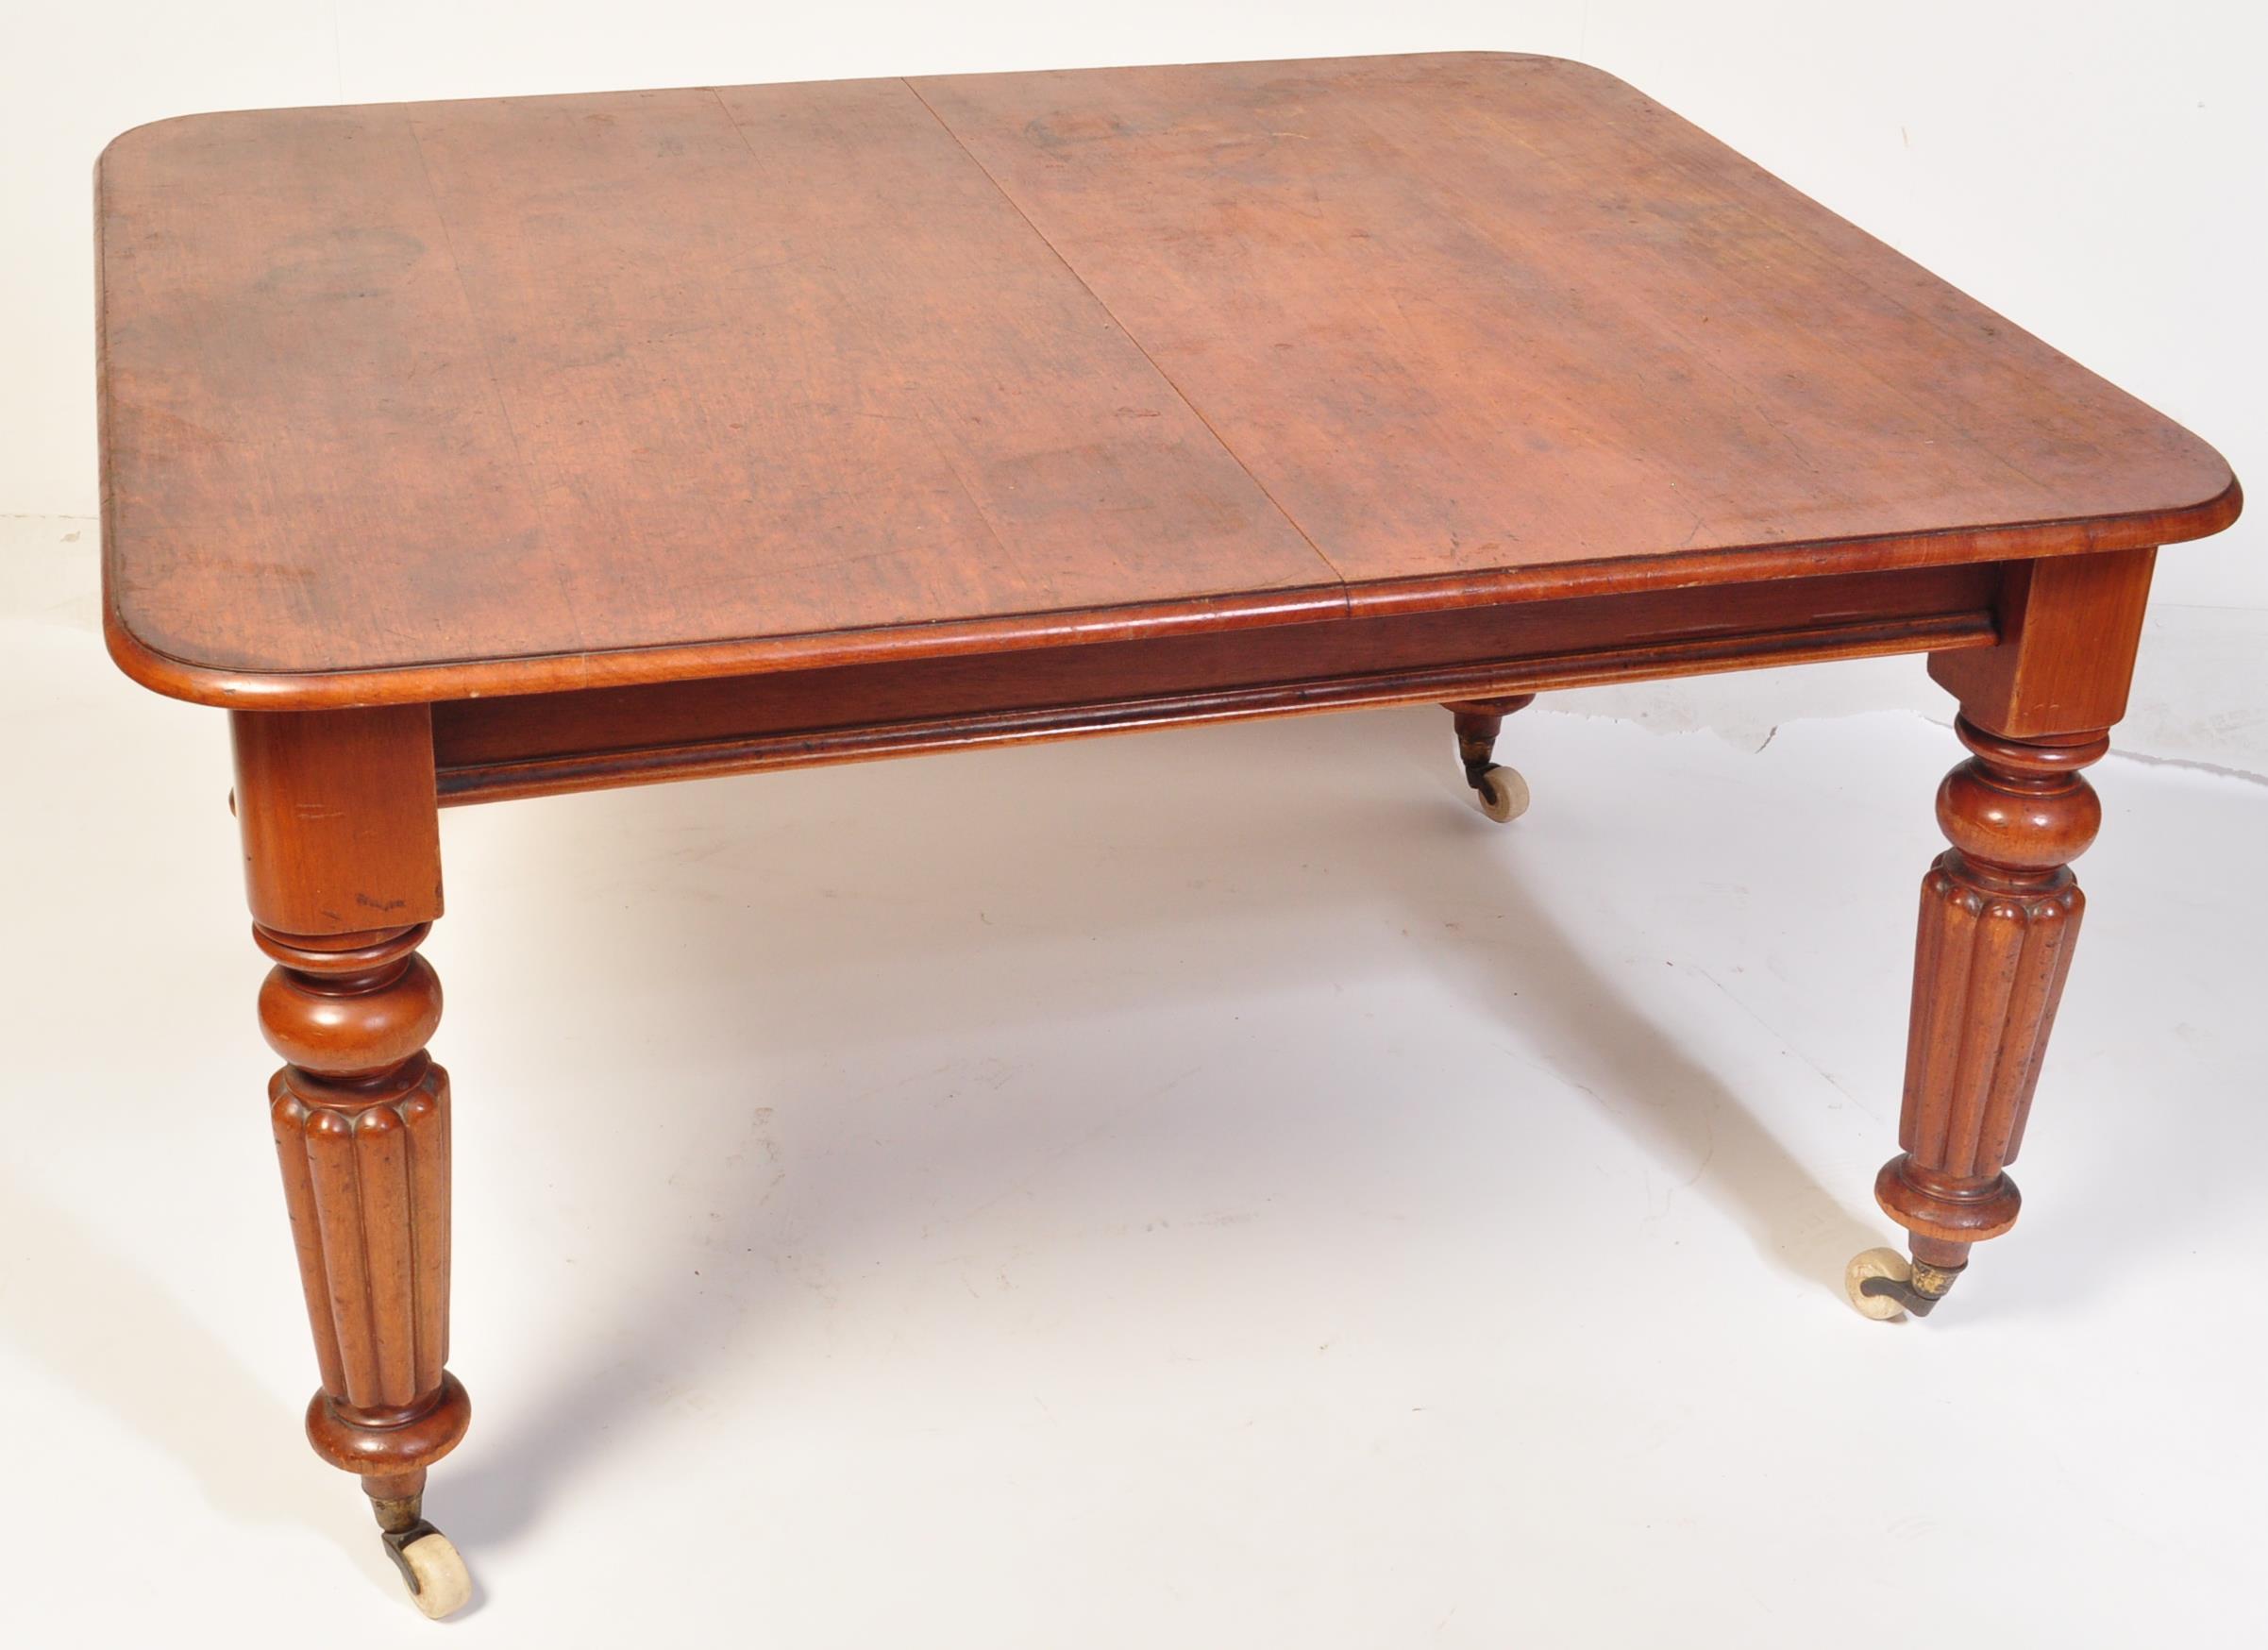 19TH CENTURY VICTORIAN MAHOGANY EXTENDABLE TABLE - Image 2 of 6